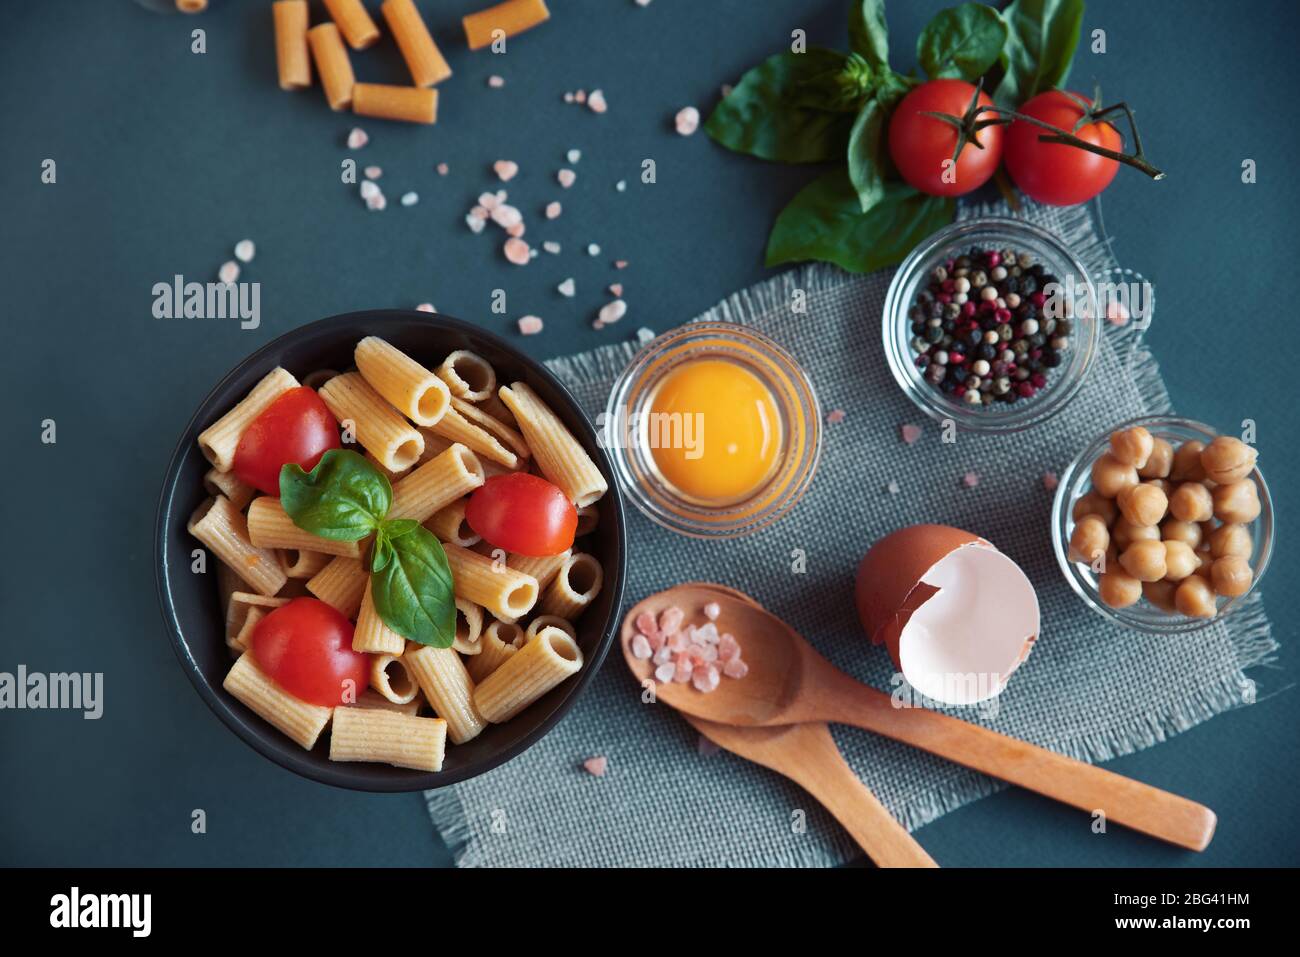 Rigatoni with cherry tomatoes and basil Stock Photo